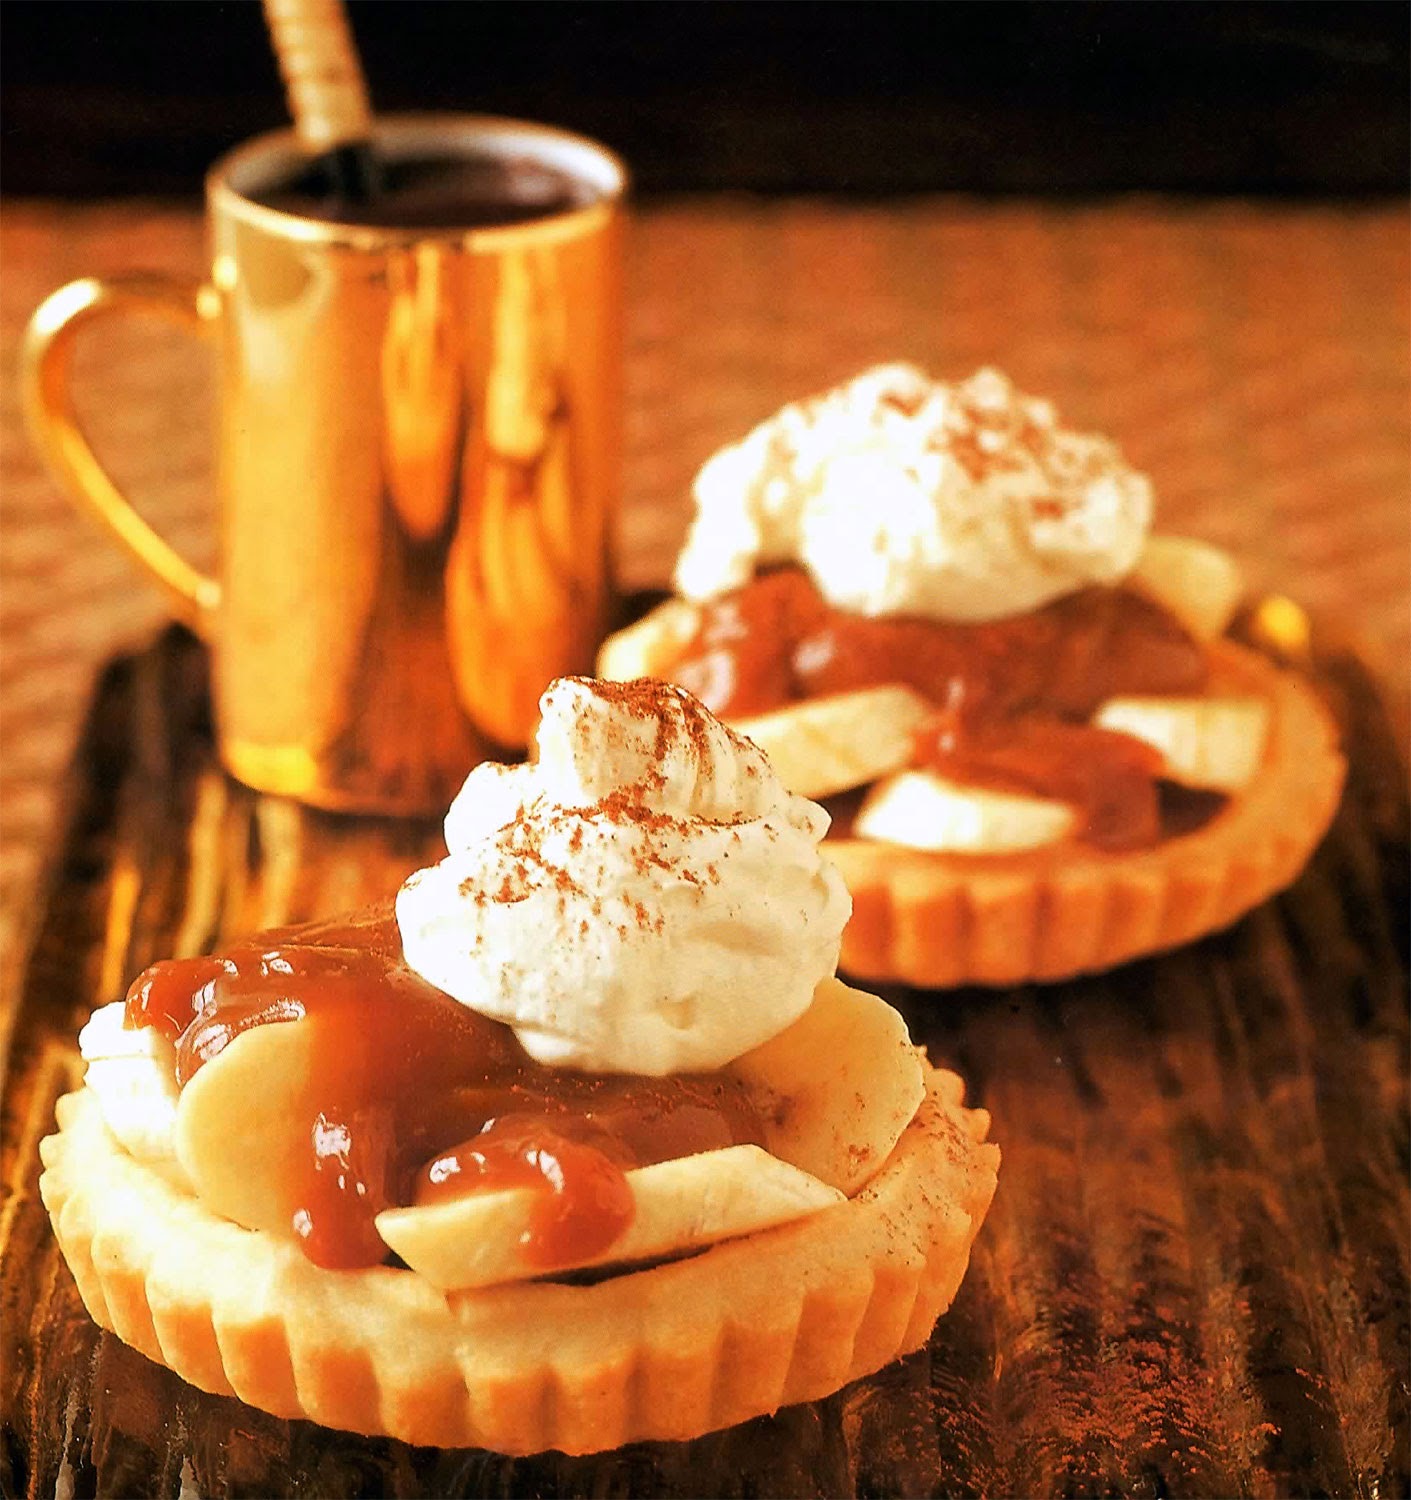 Banoffee Tarts Recipe: Miniature banoffee pies in a baked shortcrust shell, topped with whipped cream and fudge sauce